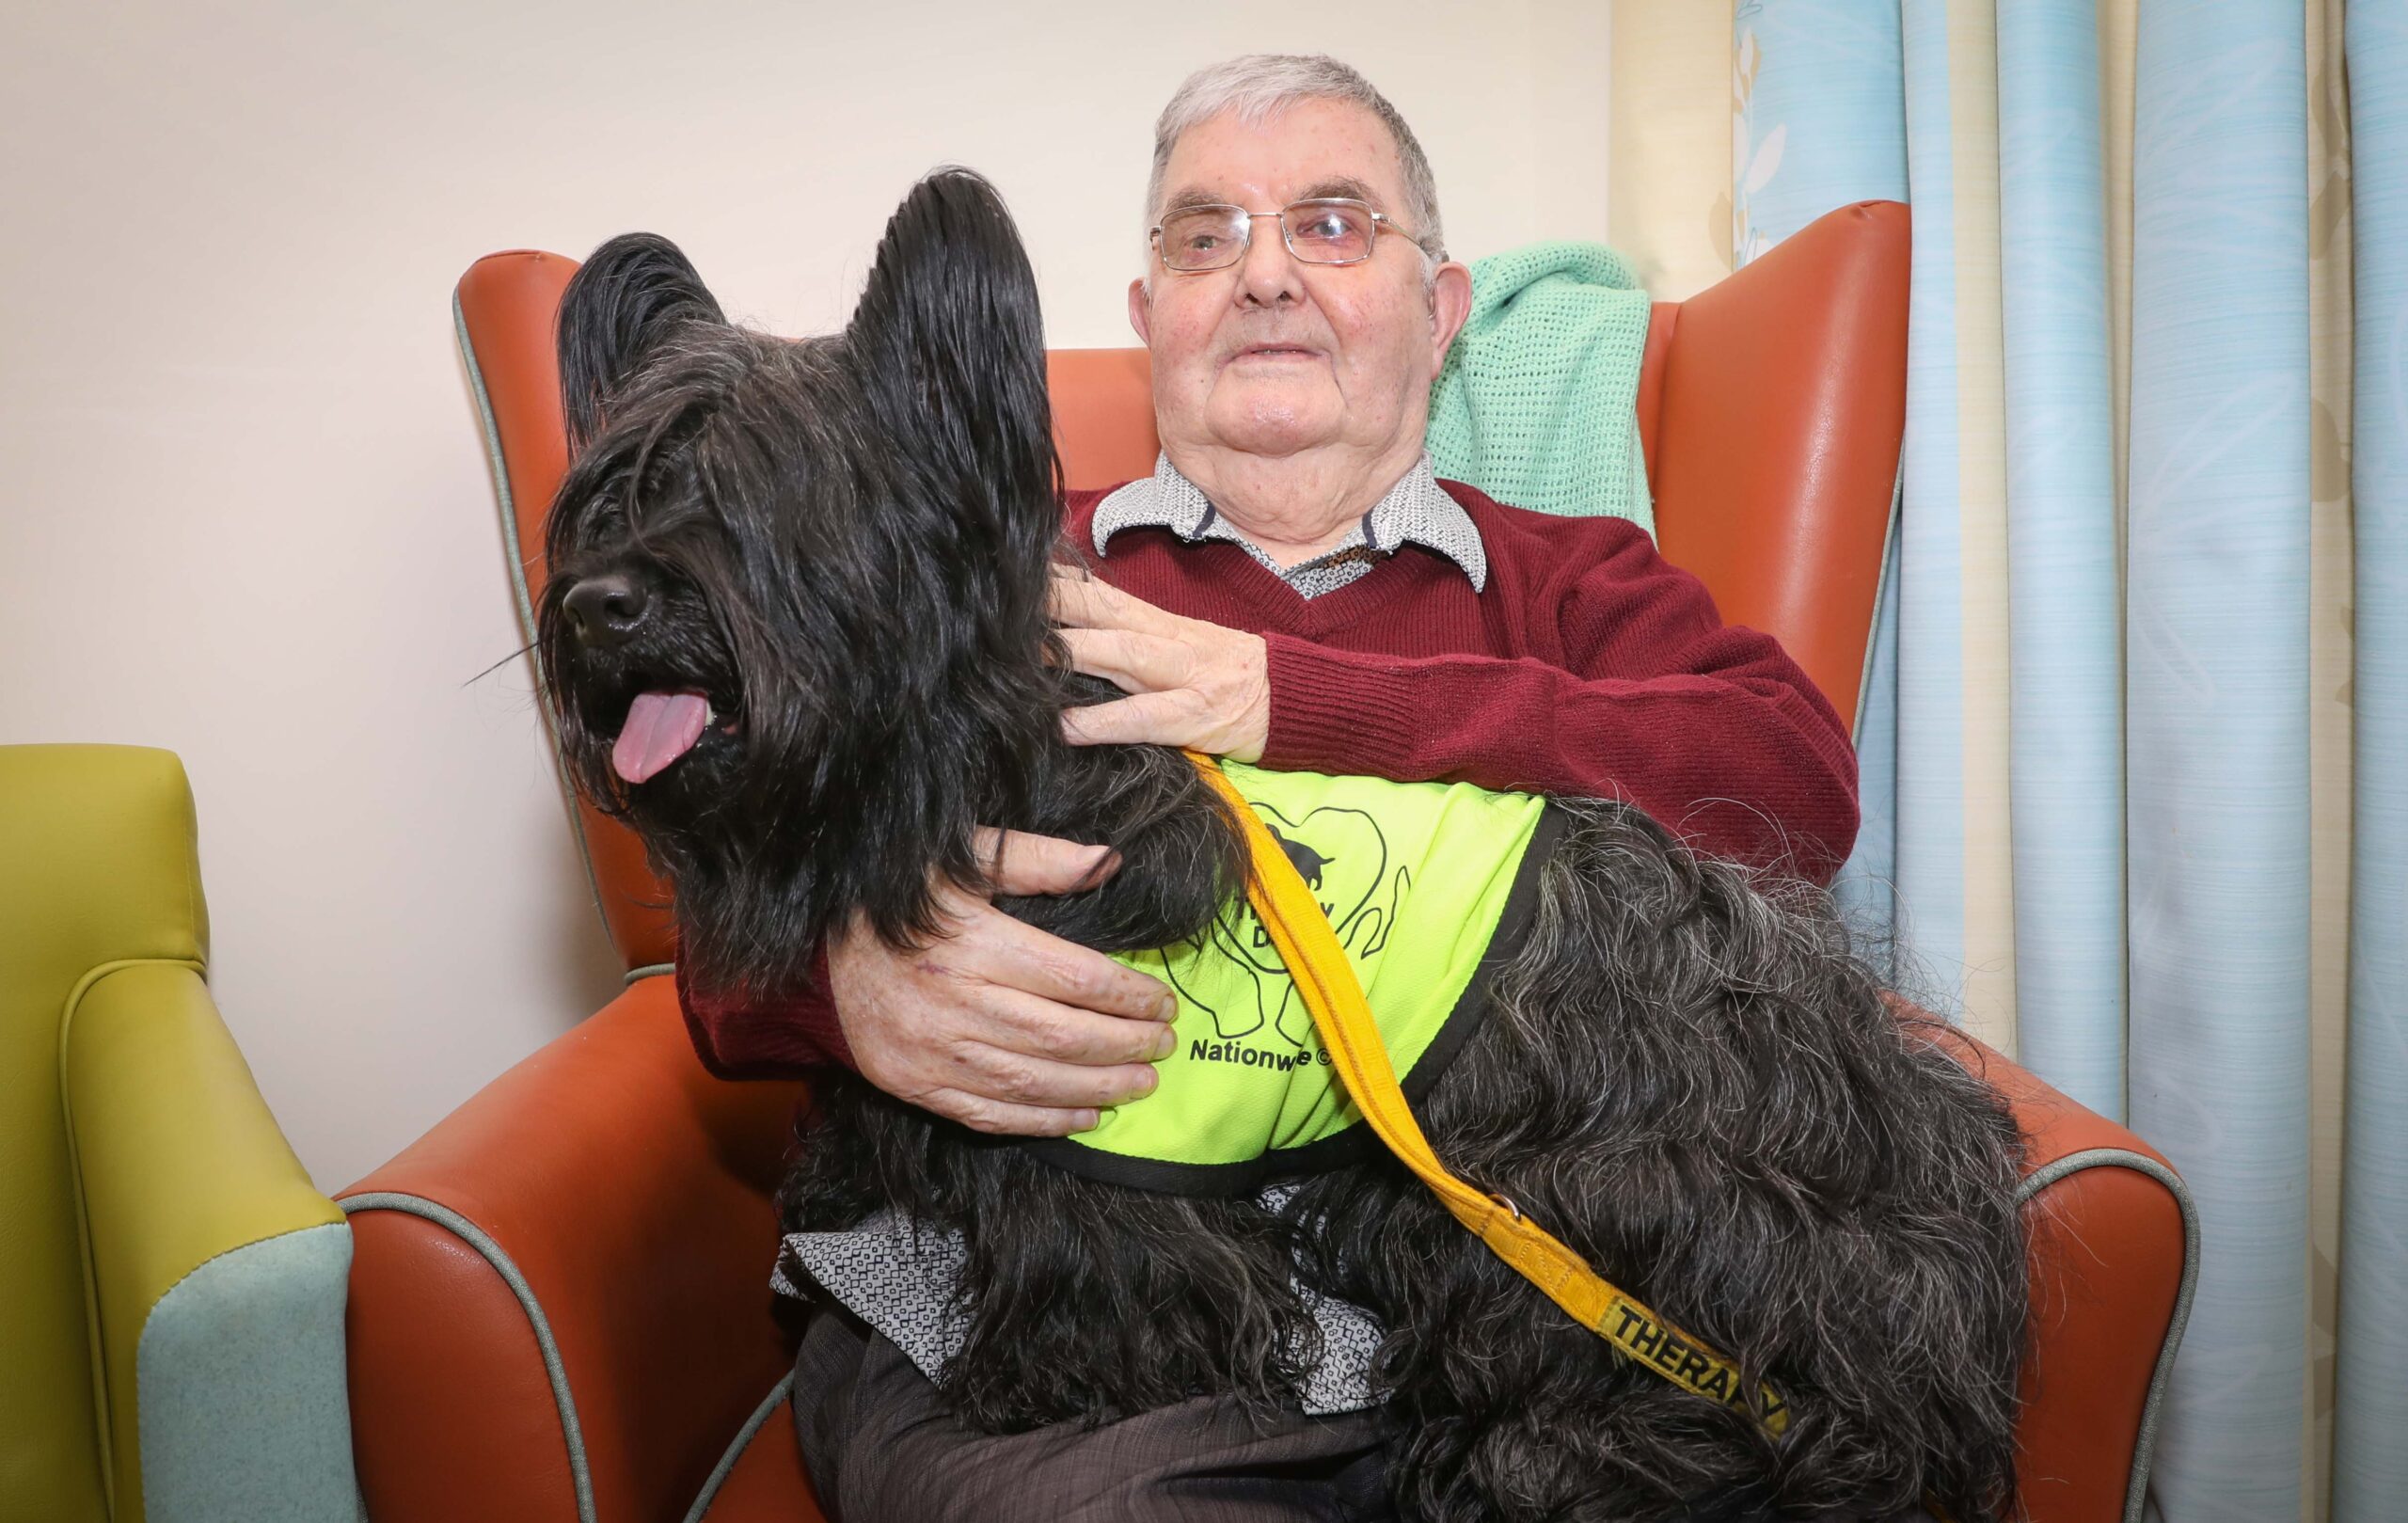 New four-legged friends make care home residents feel better at a stroke